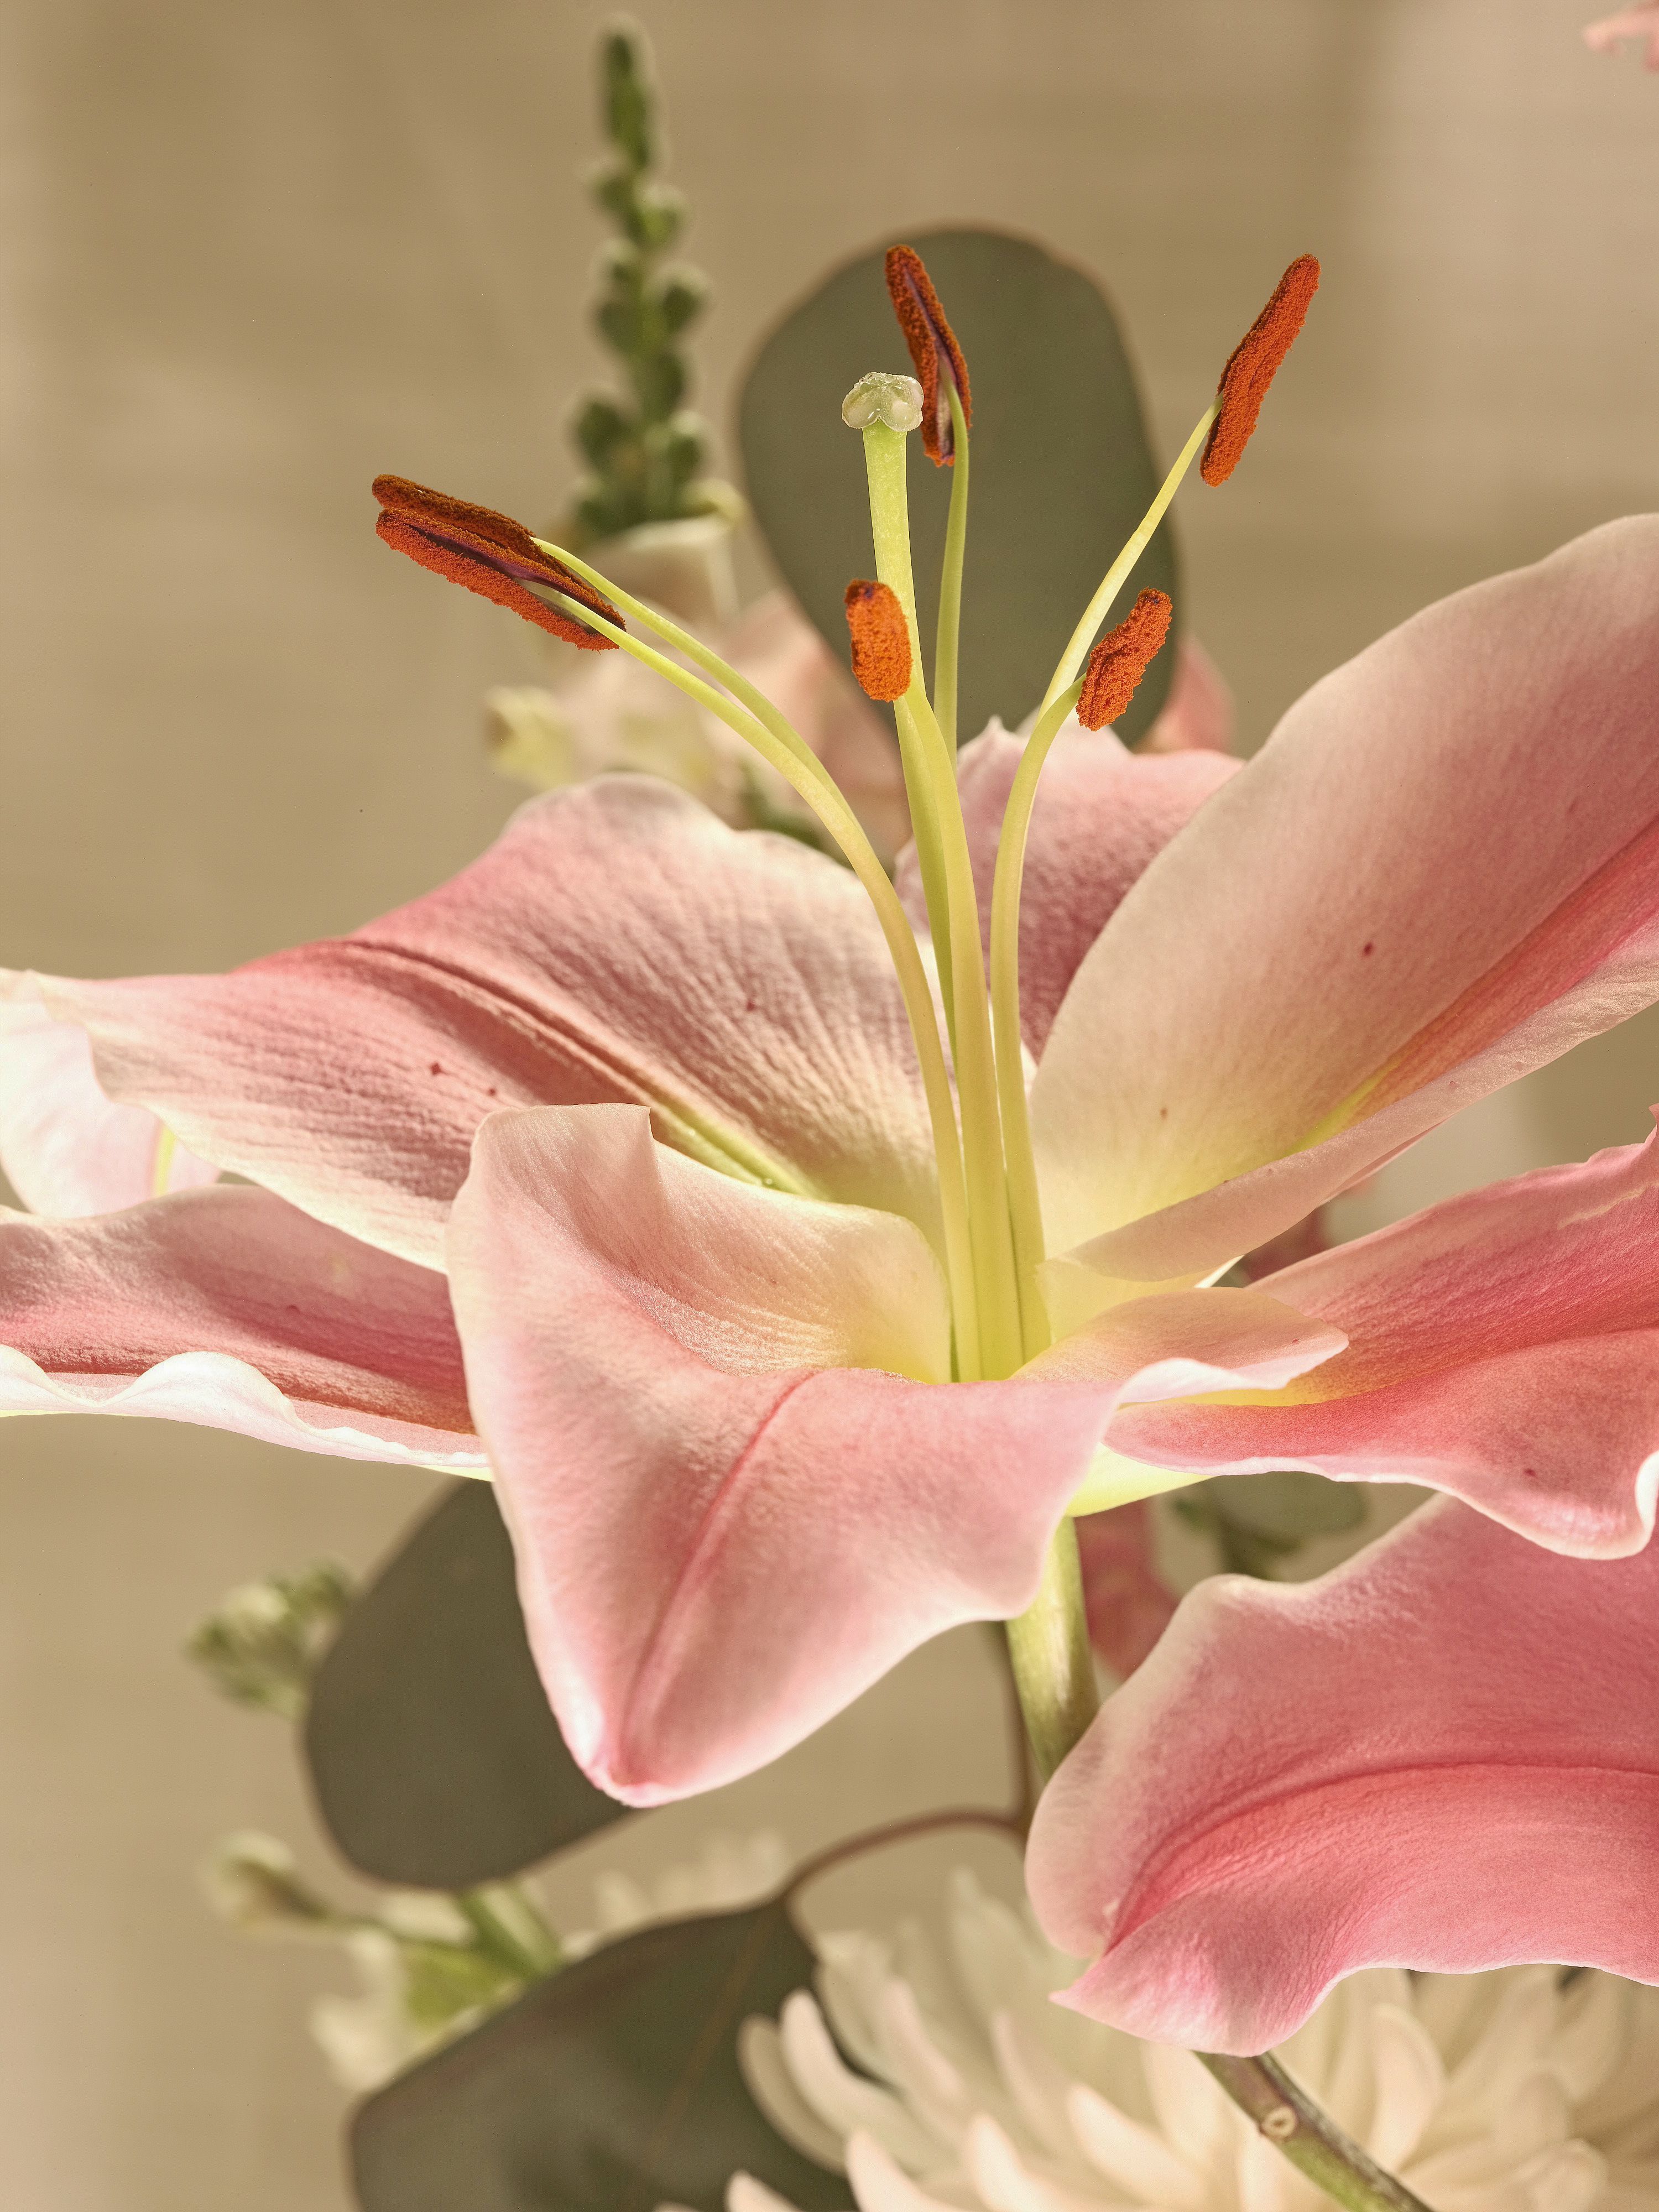 Lilies and assorted floral macro photography in Fort Worth Texas